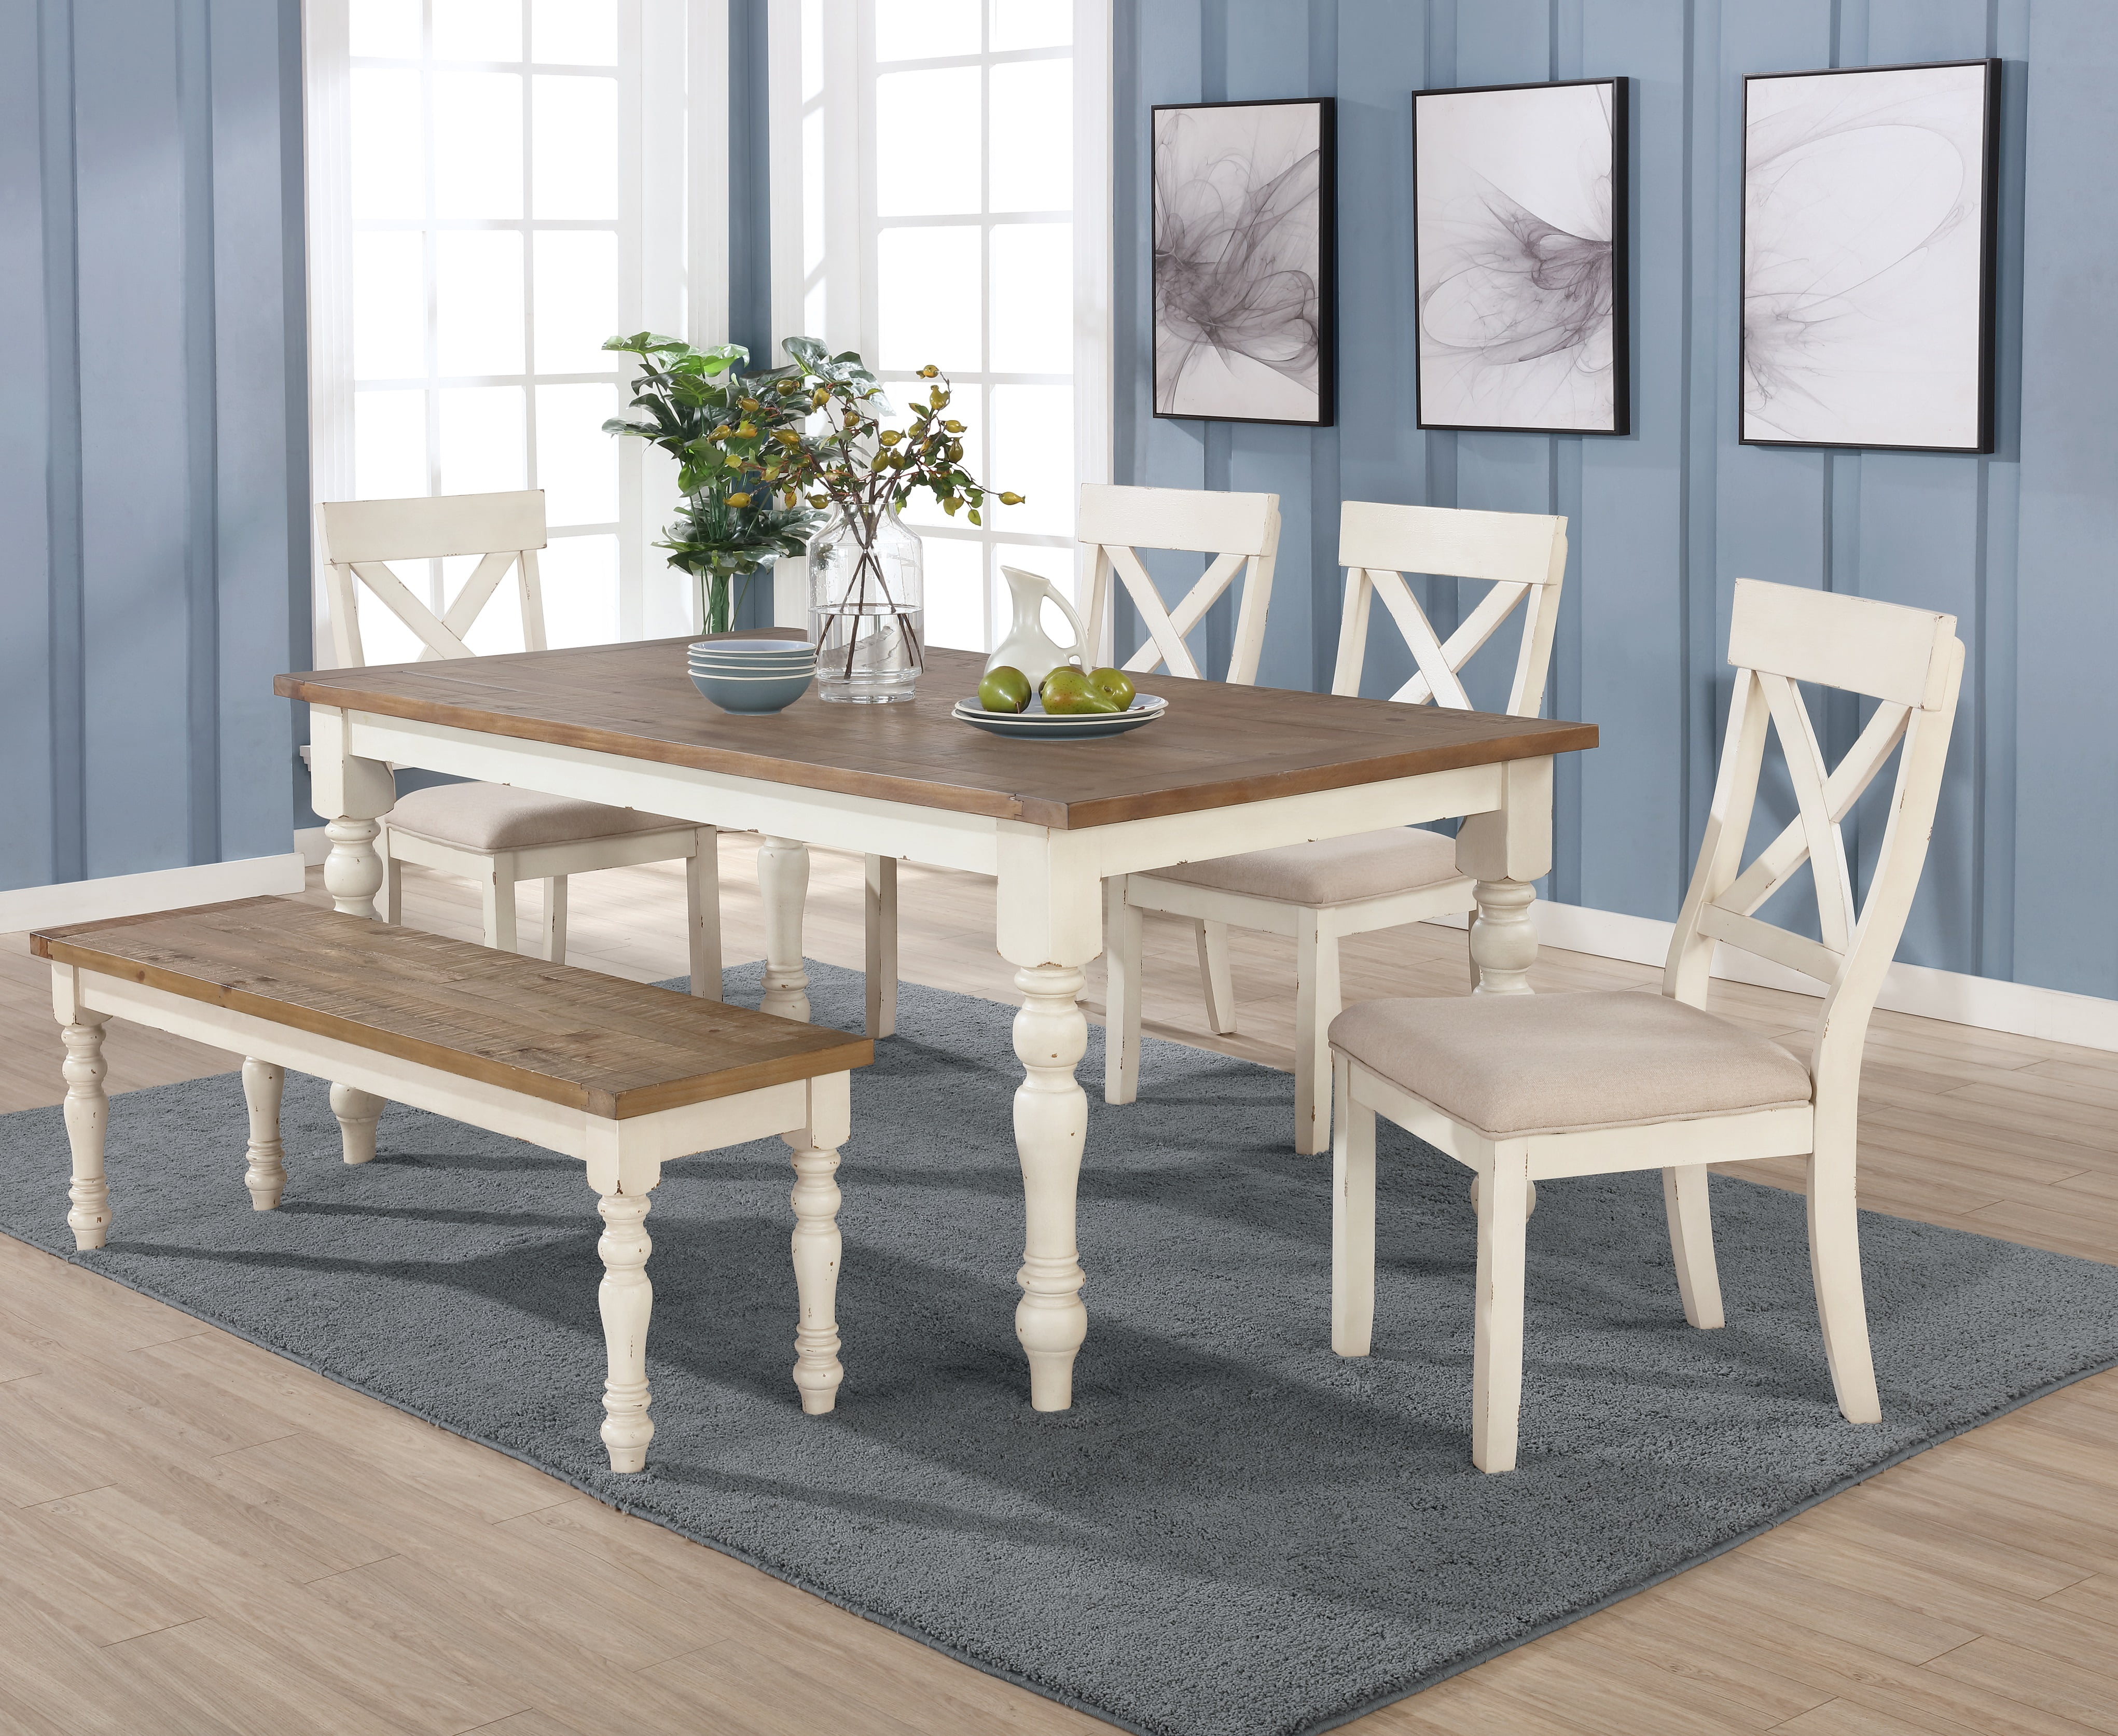  kitchen tables with bench seating and chairs